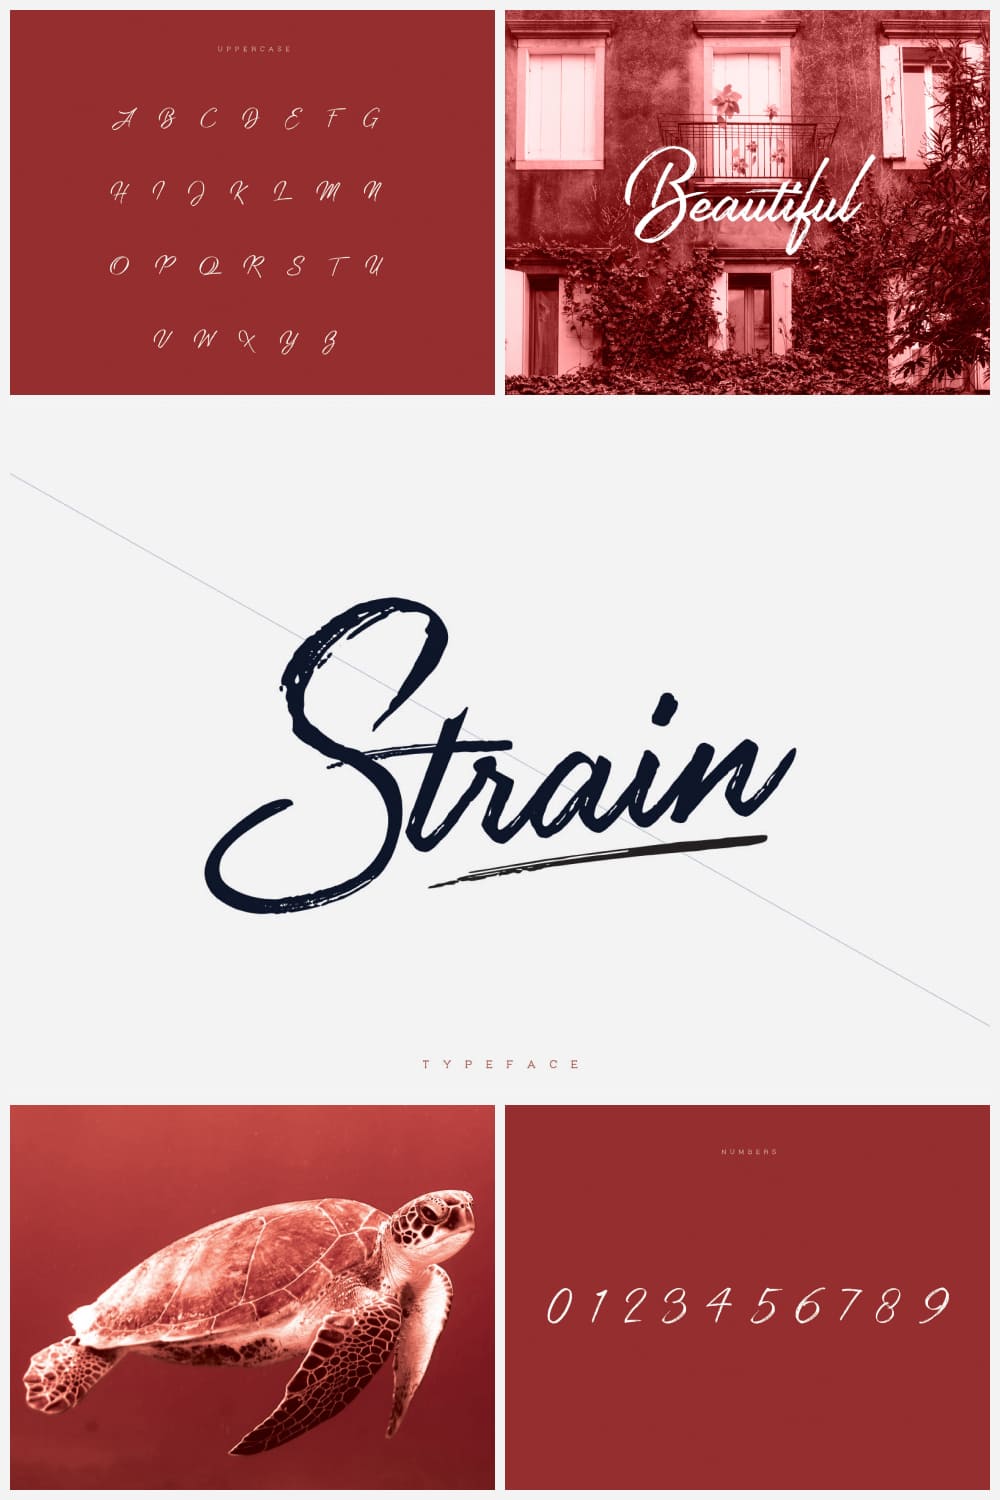 Frank calligraphic typeface on a red and grey backgrounds.